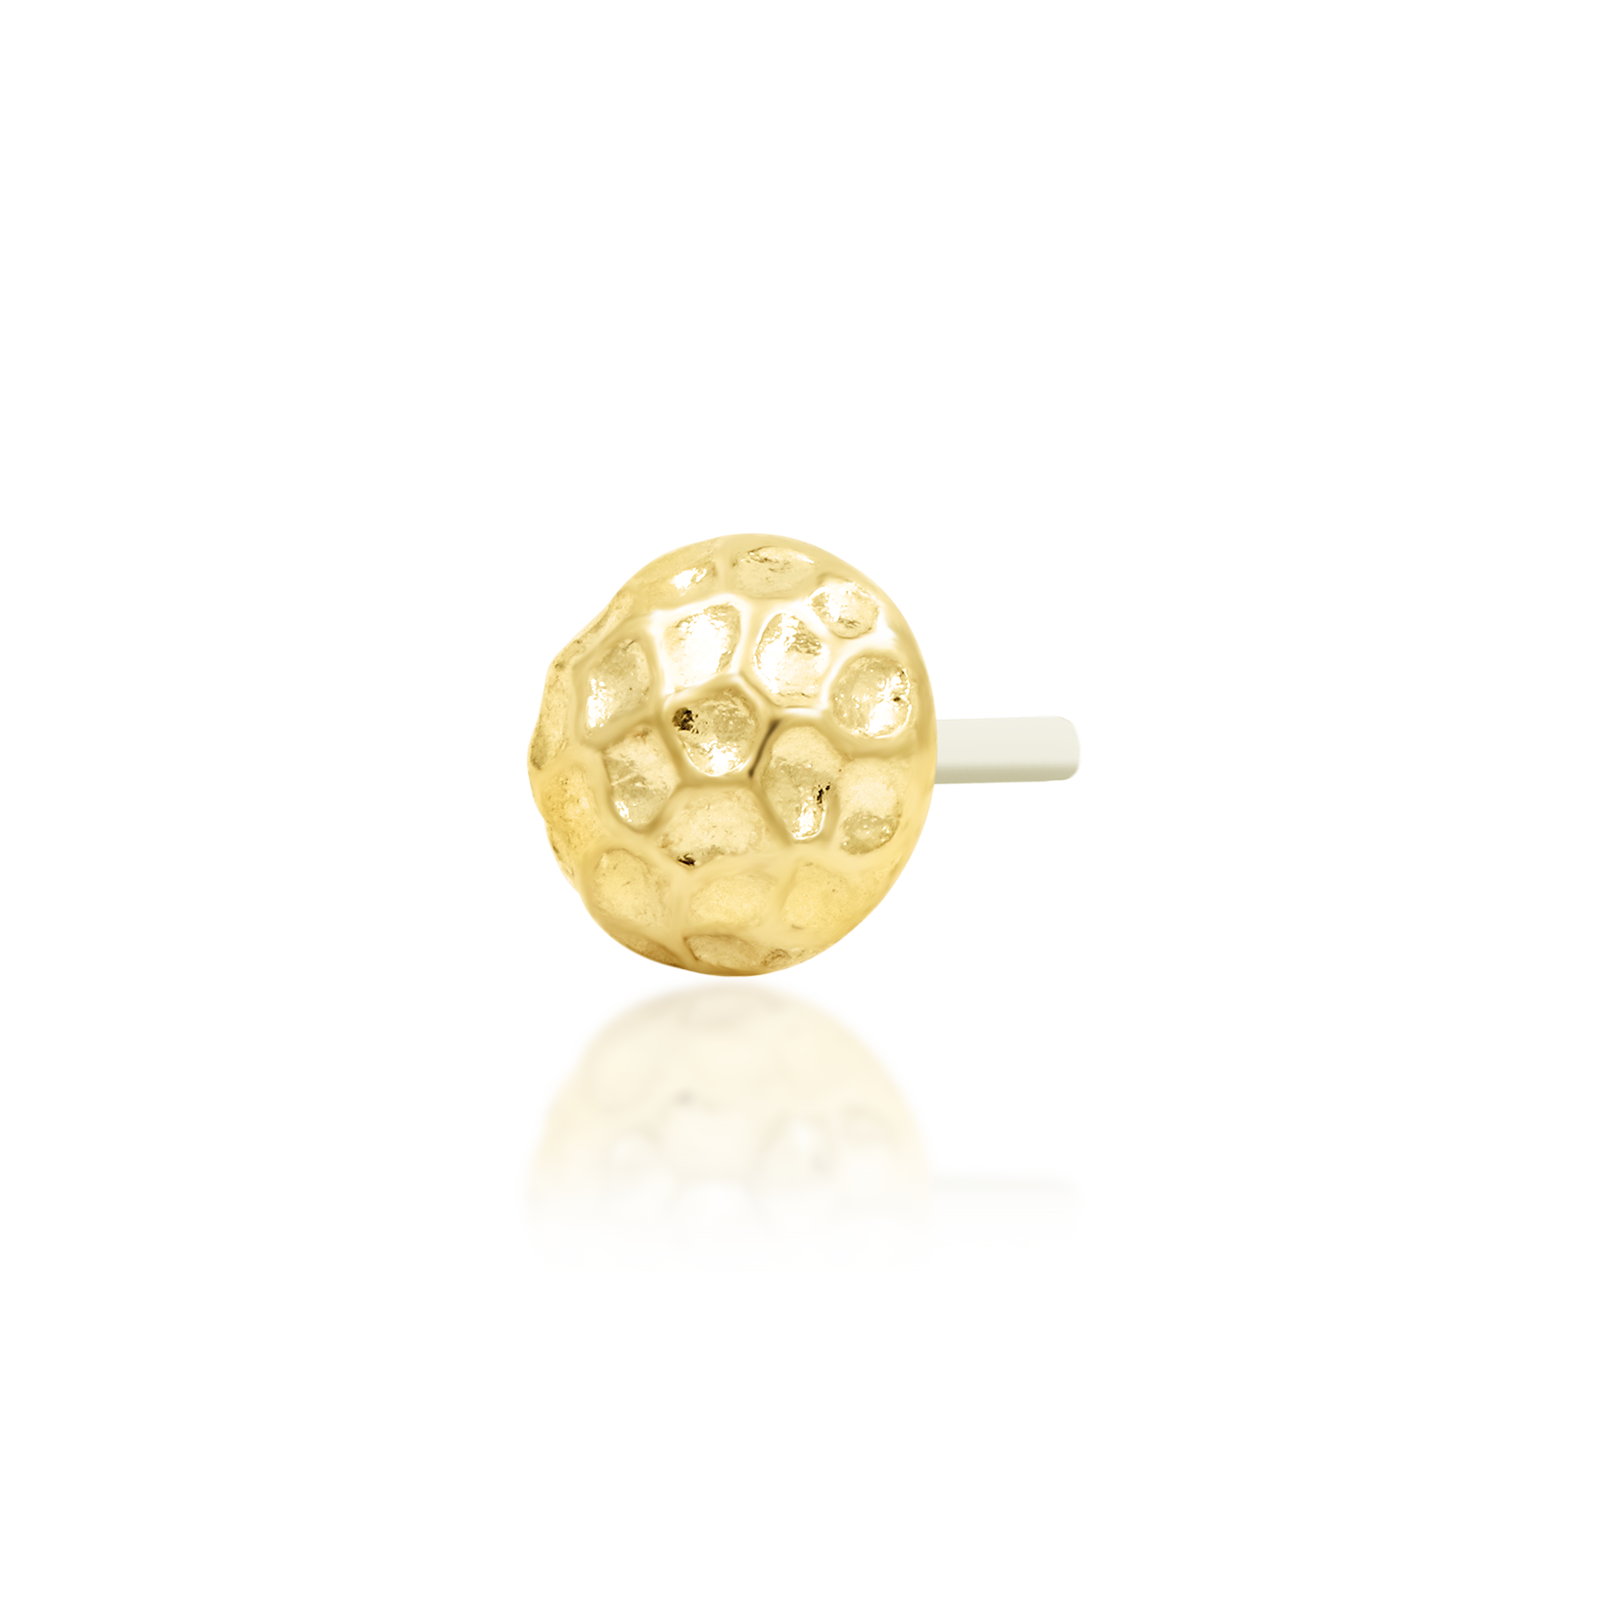 Hammered Dome in 14k Gold by Junipurr